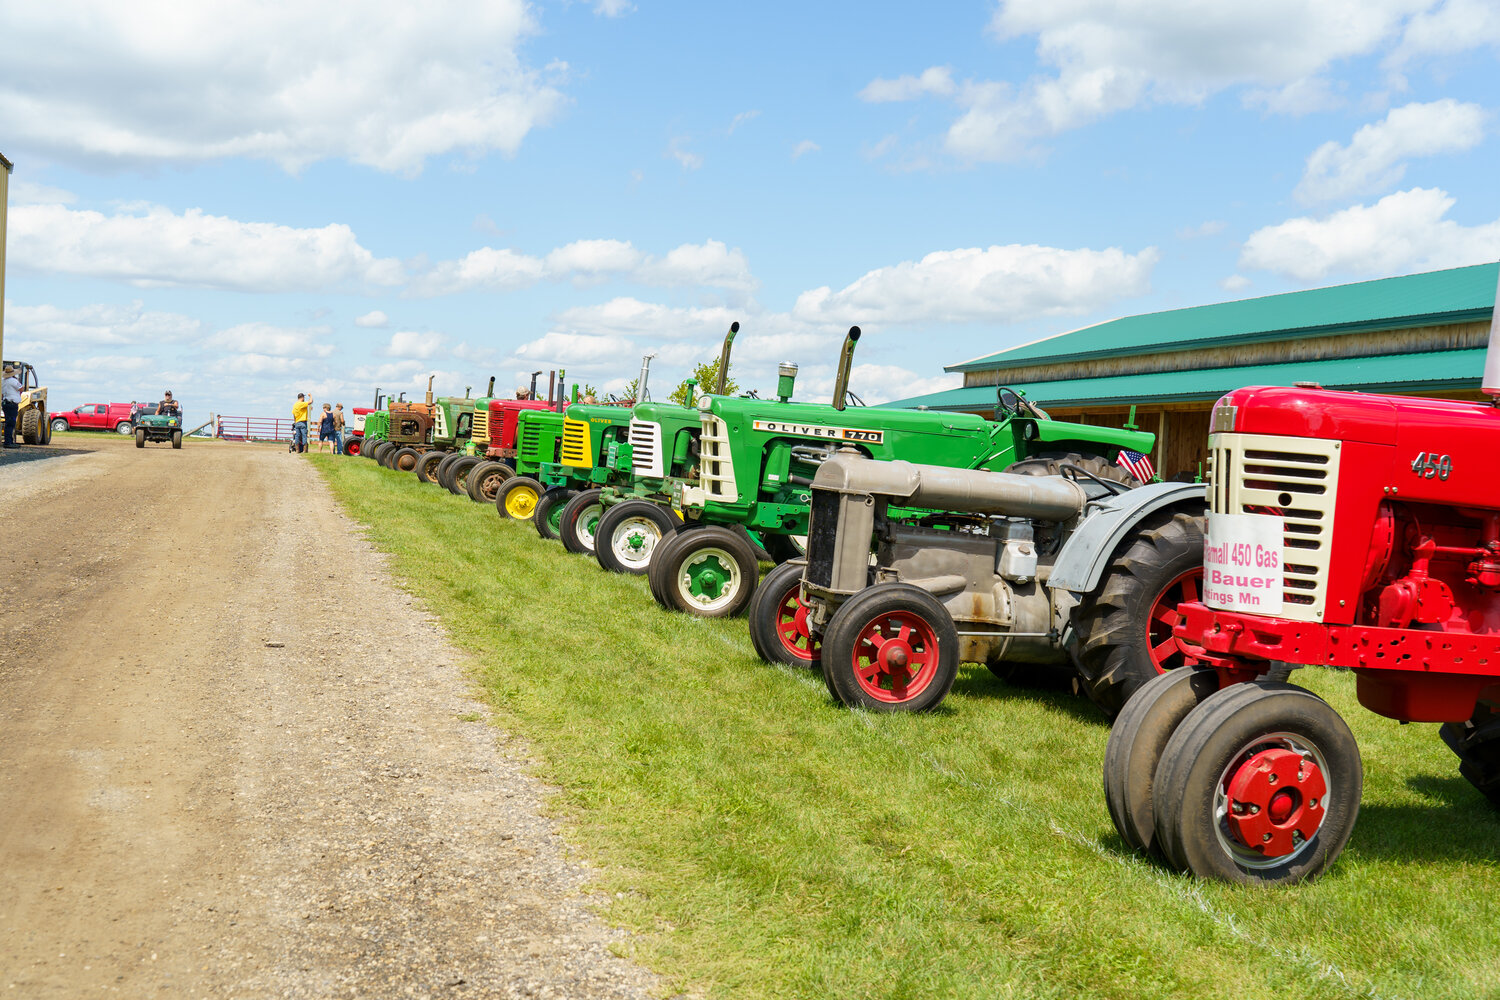 The lineup of tractors pictured here is just a small sample of all the antique tractors on display at the antique power show. One of the owners of the tractors made a comment that many parts for these old tractors are still available for purchase making restoration much easier.